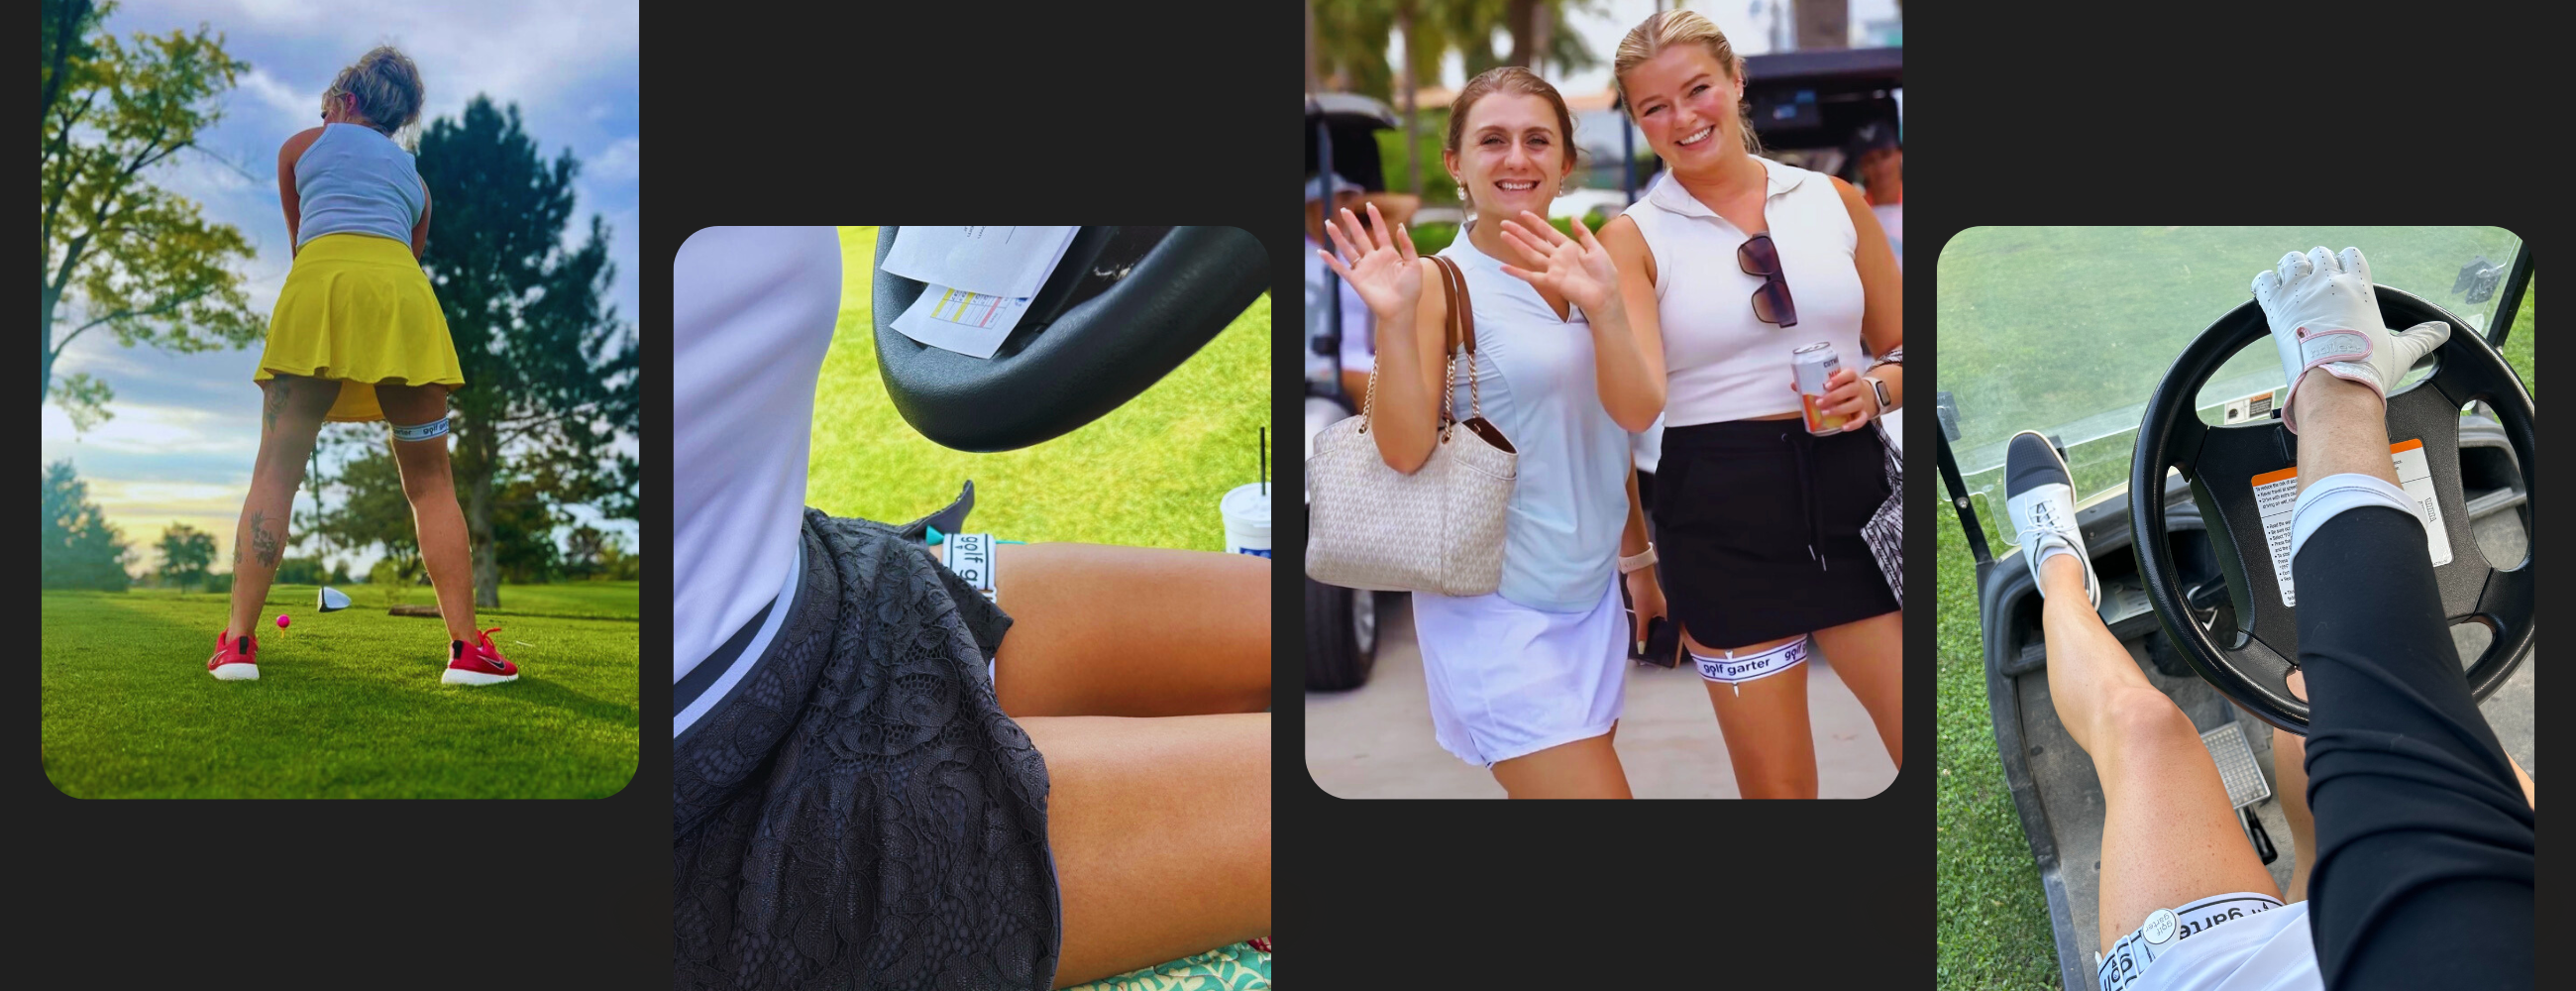 This is a collage of different female golfers out on the course with their Golf Garters visible.